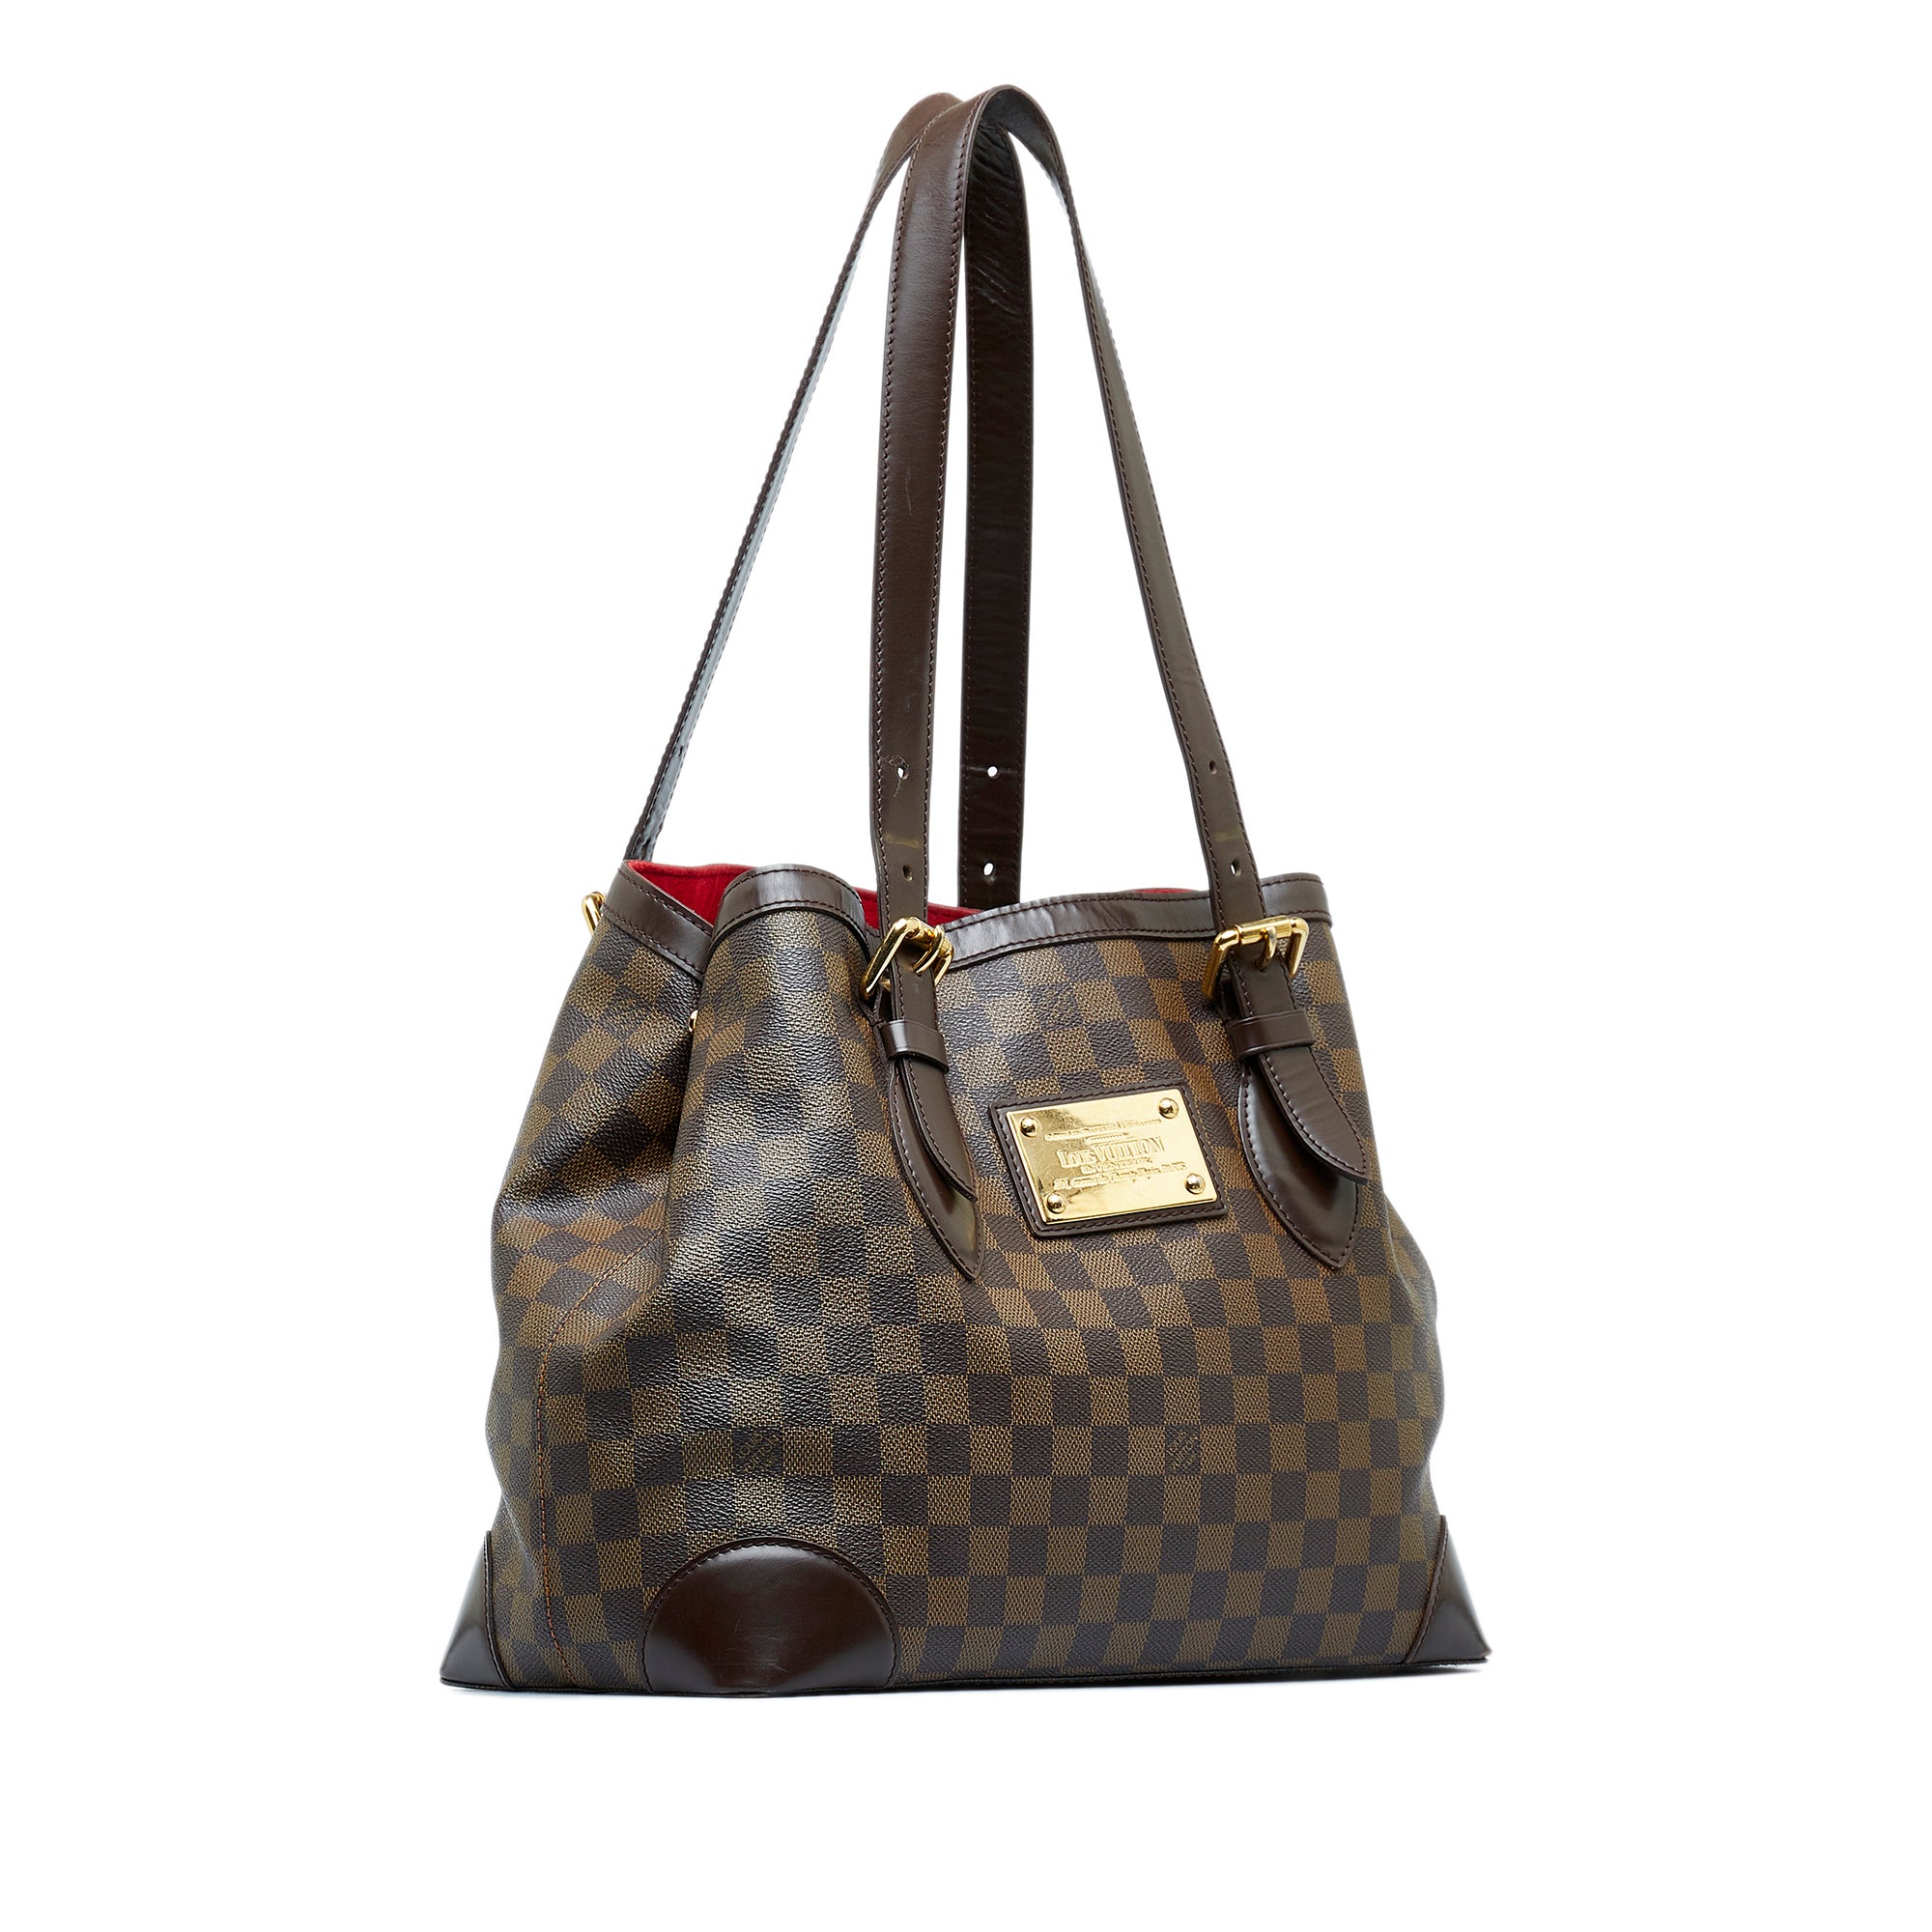 Louis Vuitton 2002 Pre-owned Hampstead PM Tote Bag - Brown